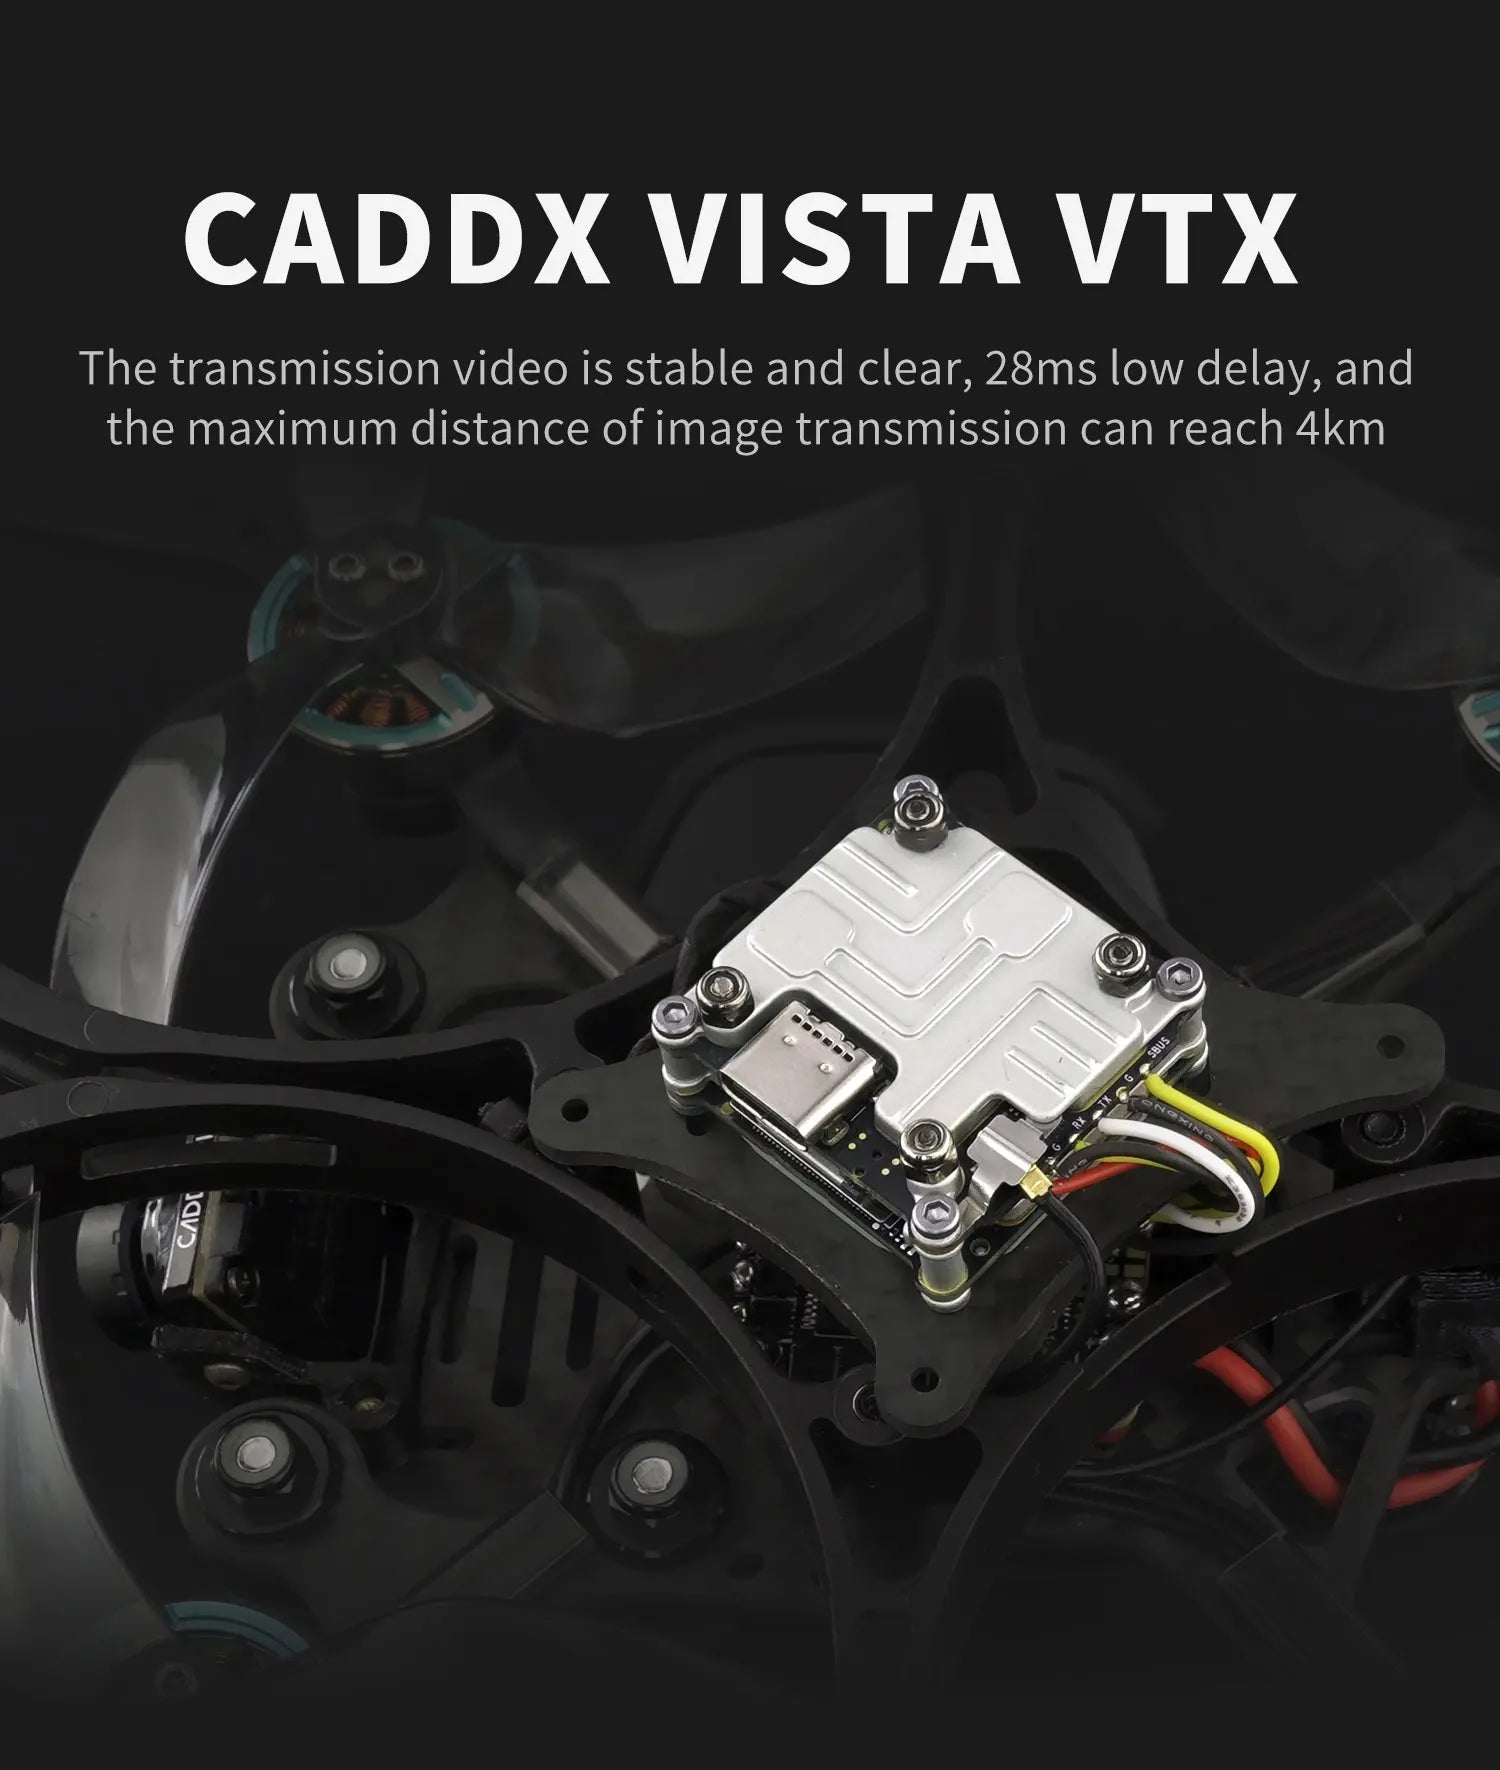 GEPRC CineLog35 FPV Drone, CADDX VISTA VTX The transmission video is stable and clear, 28m